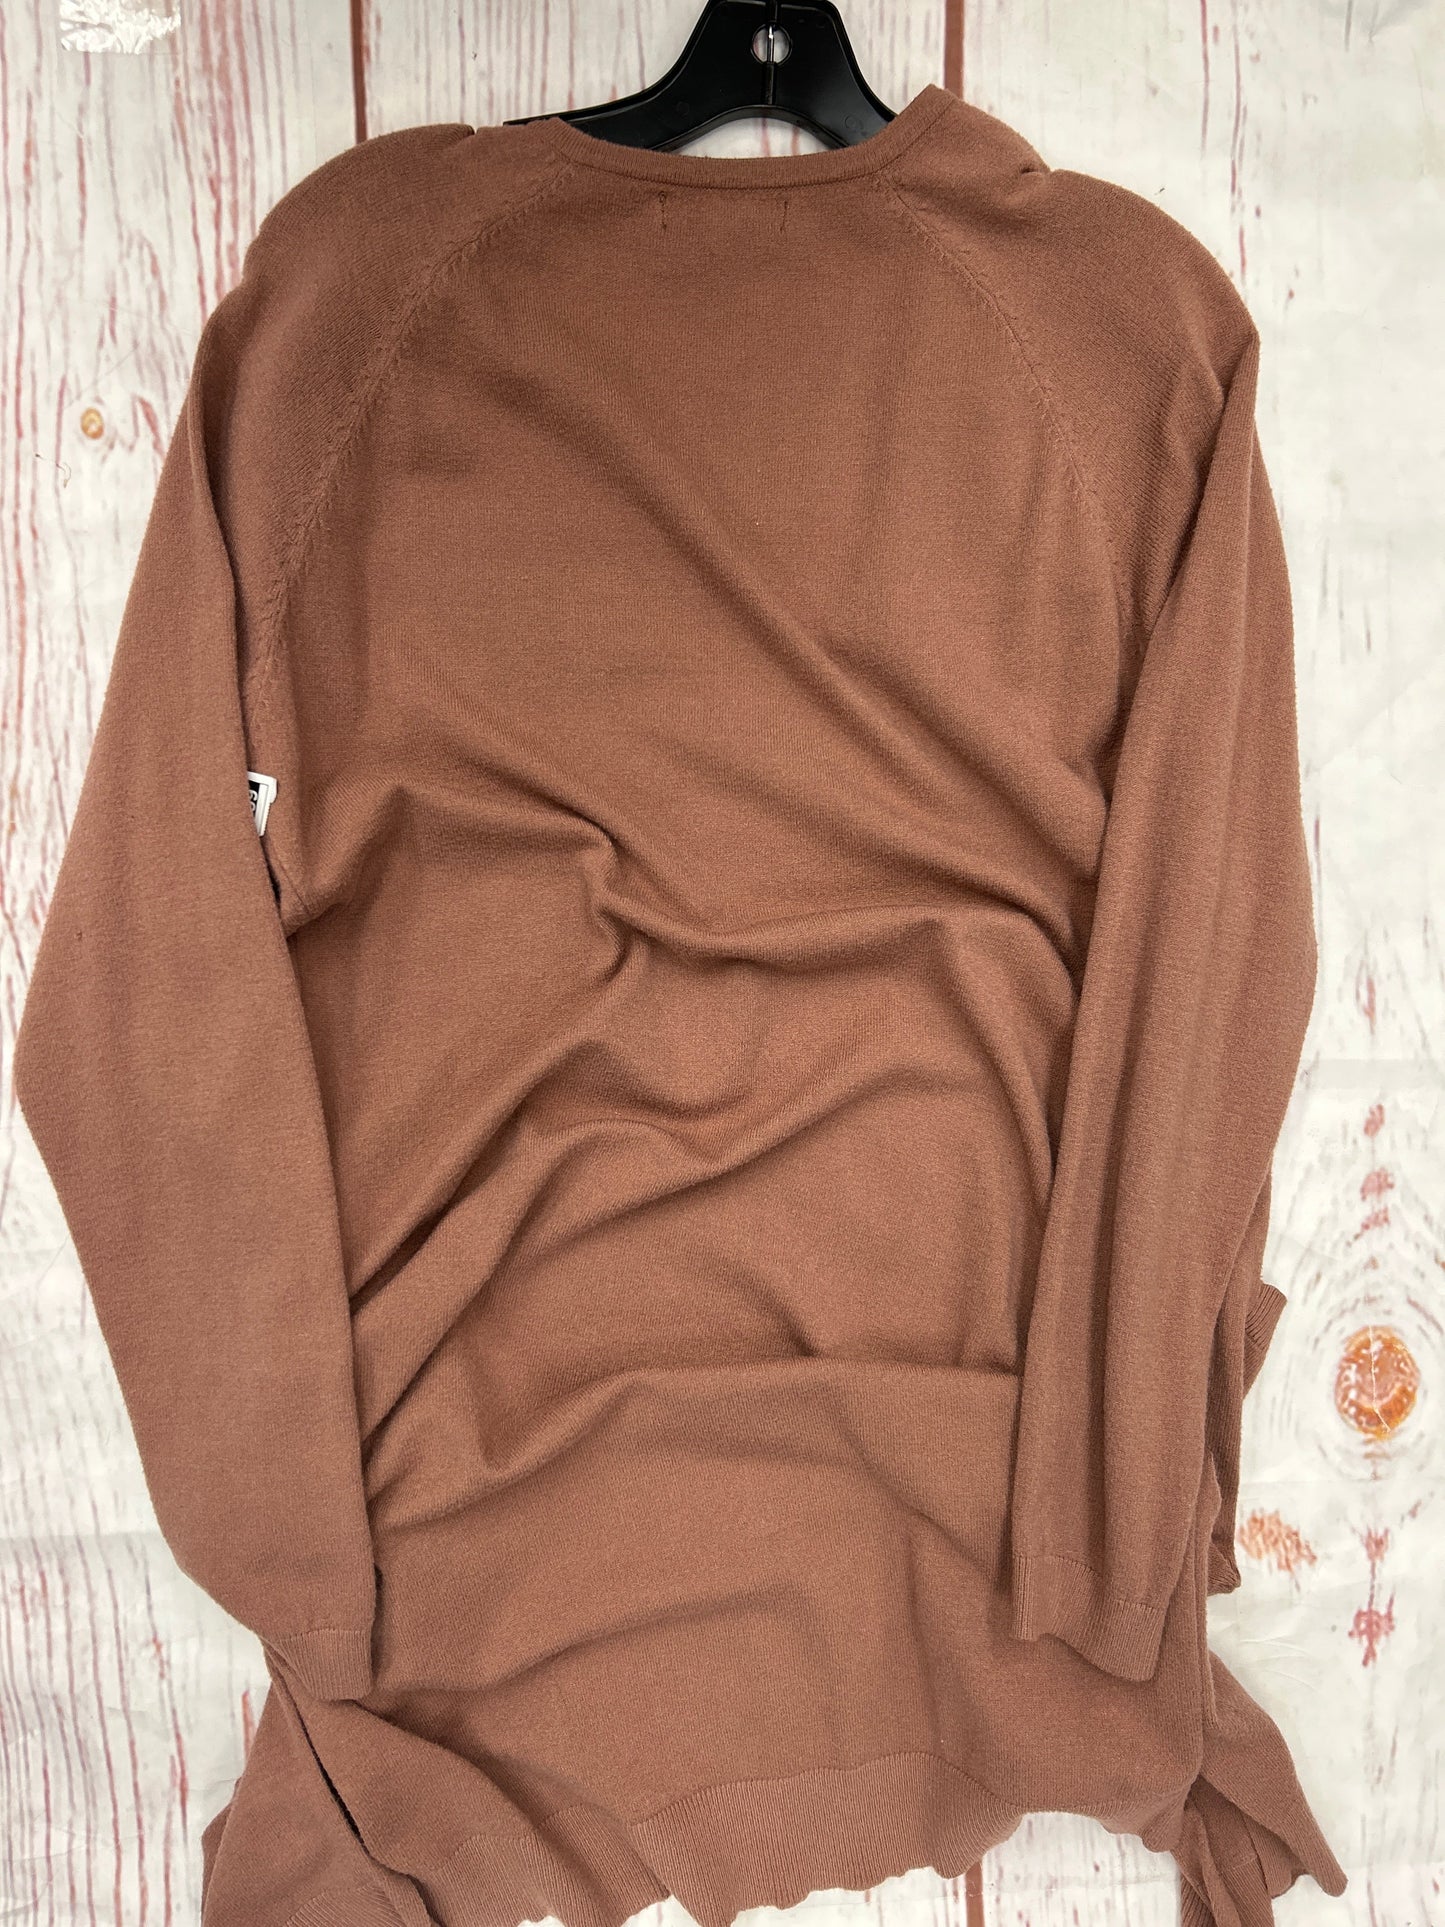 Sweater Cardigan By Love Tree  Size: L